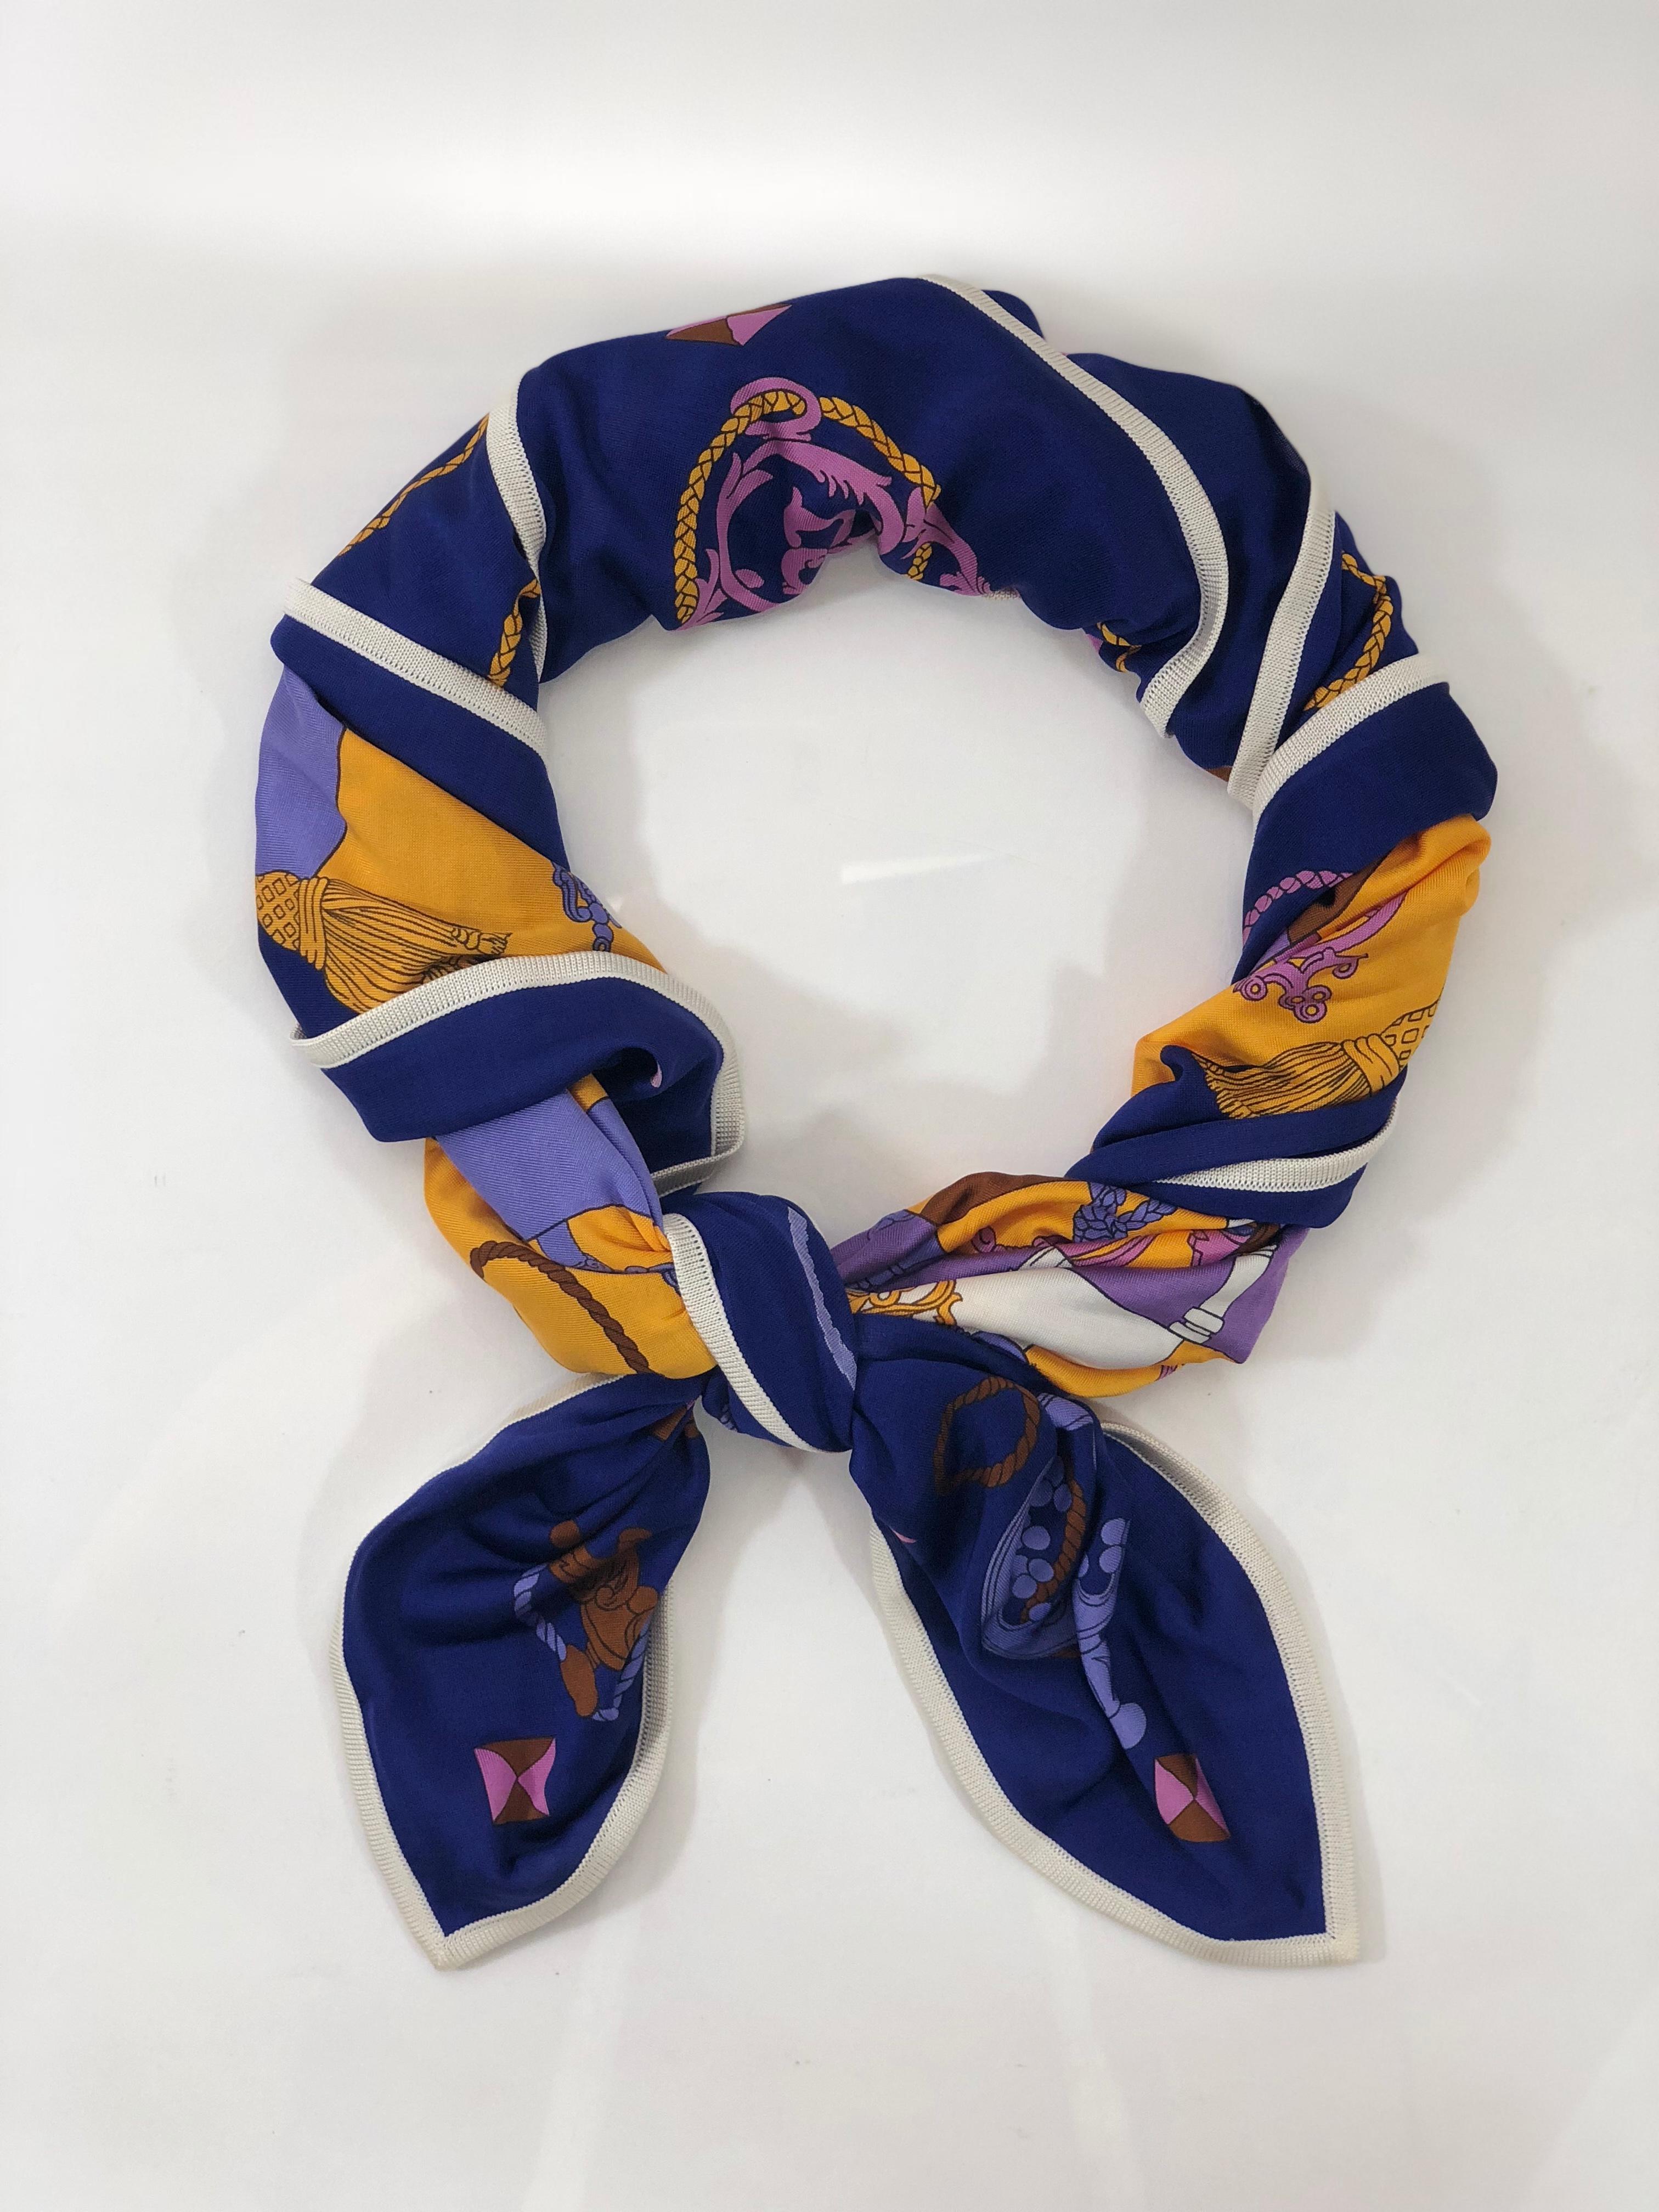 MODEL - Hermes 100% Silk Jersey Knit Scarf Tours De Cles in Purple.

CONDITION - Exceptional. No signs of wear.

SKU - 2331

ORIGINAL RETAIL PRICE - 895 + tax

ORIGIN - France

DIMENSIONS - L39 x H35.5 x D.02

MATERIAL - Silk 

COMES WITH - Original